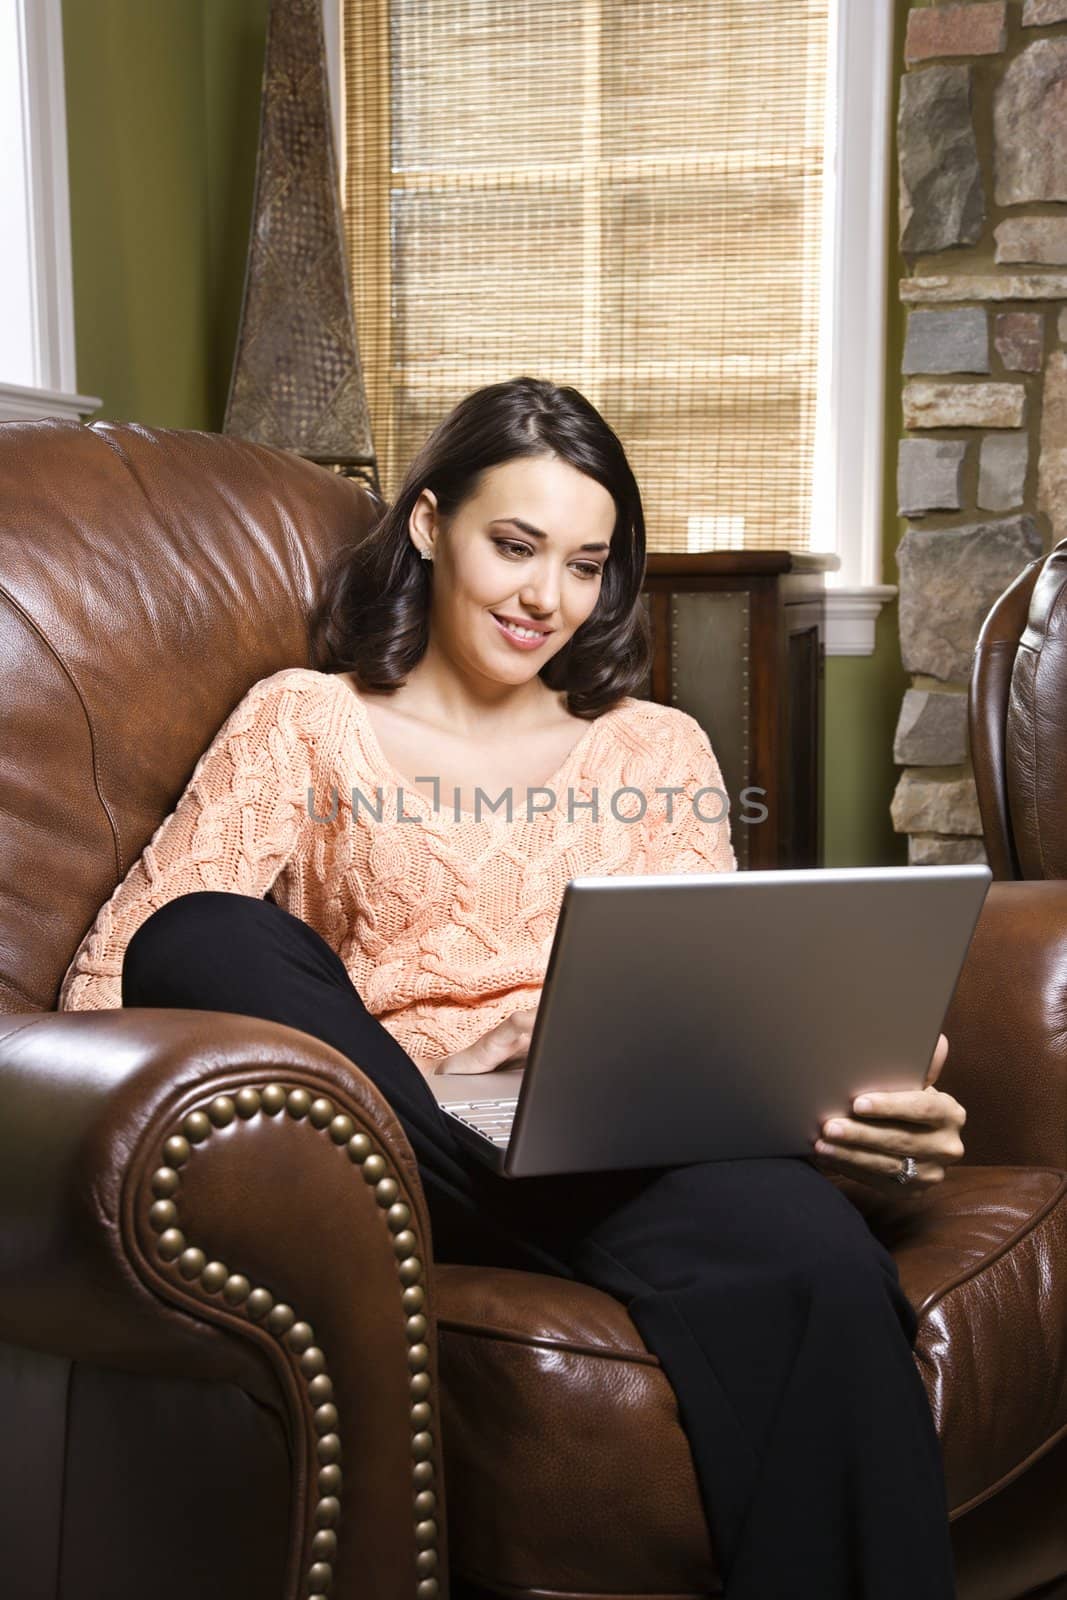 Caucasian/Hispanic young woman sitting in leather chair looking at laptop computer.